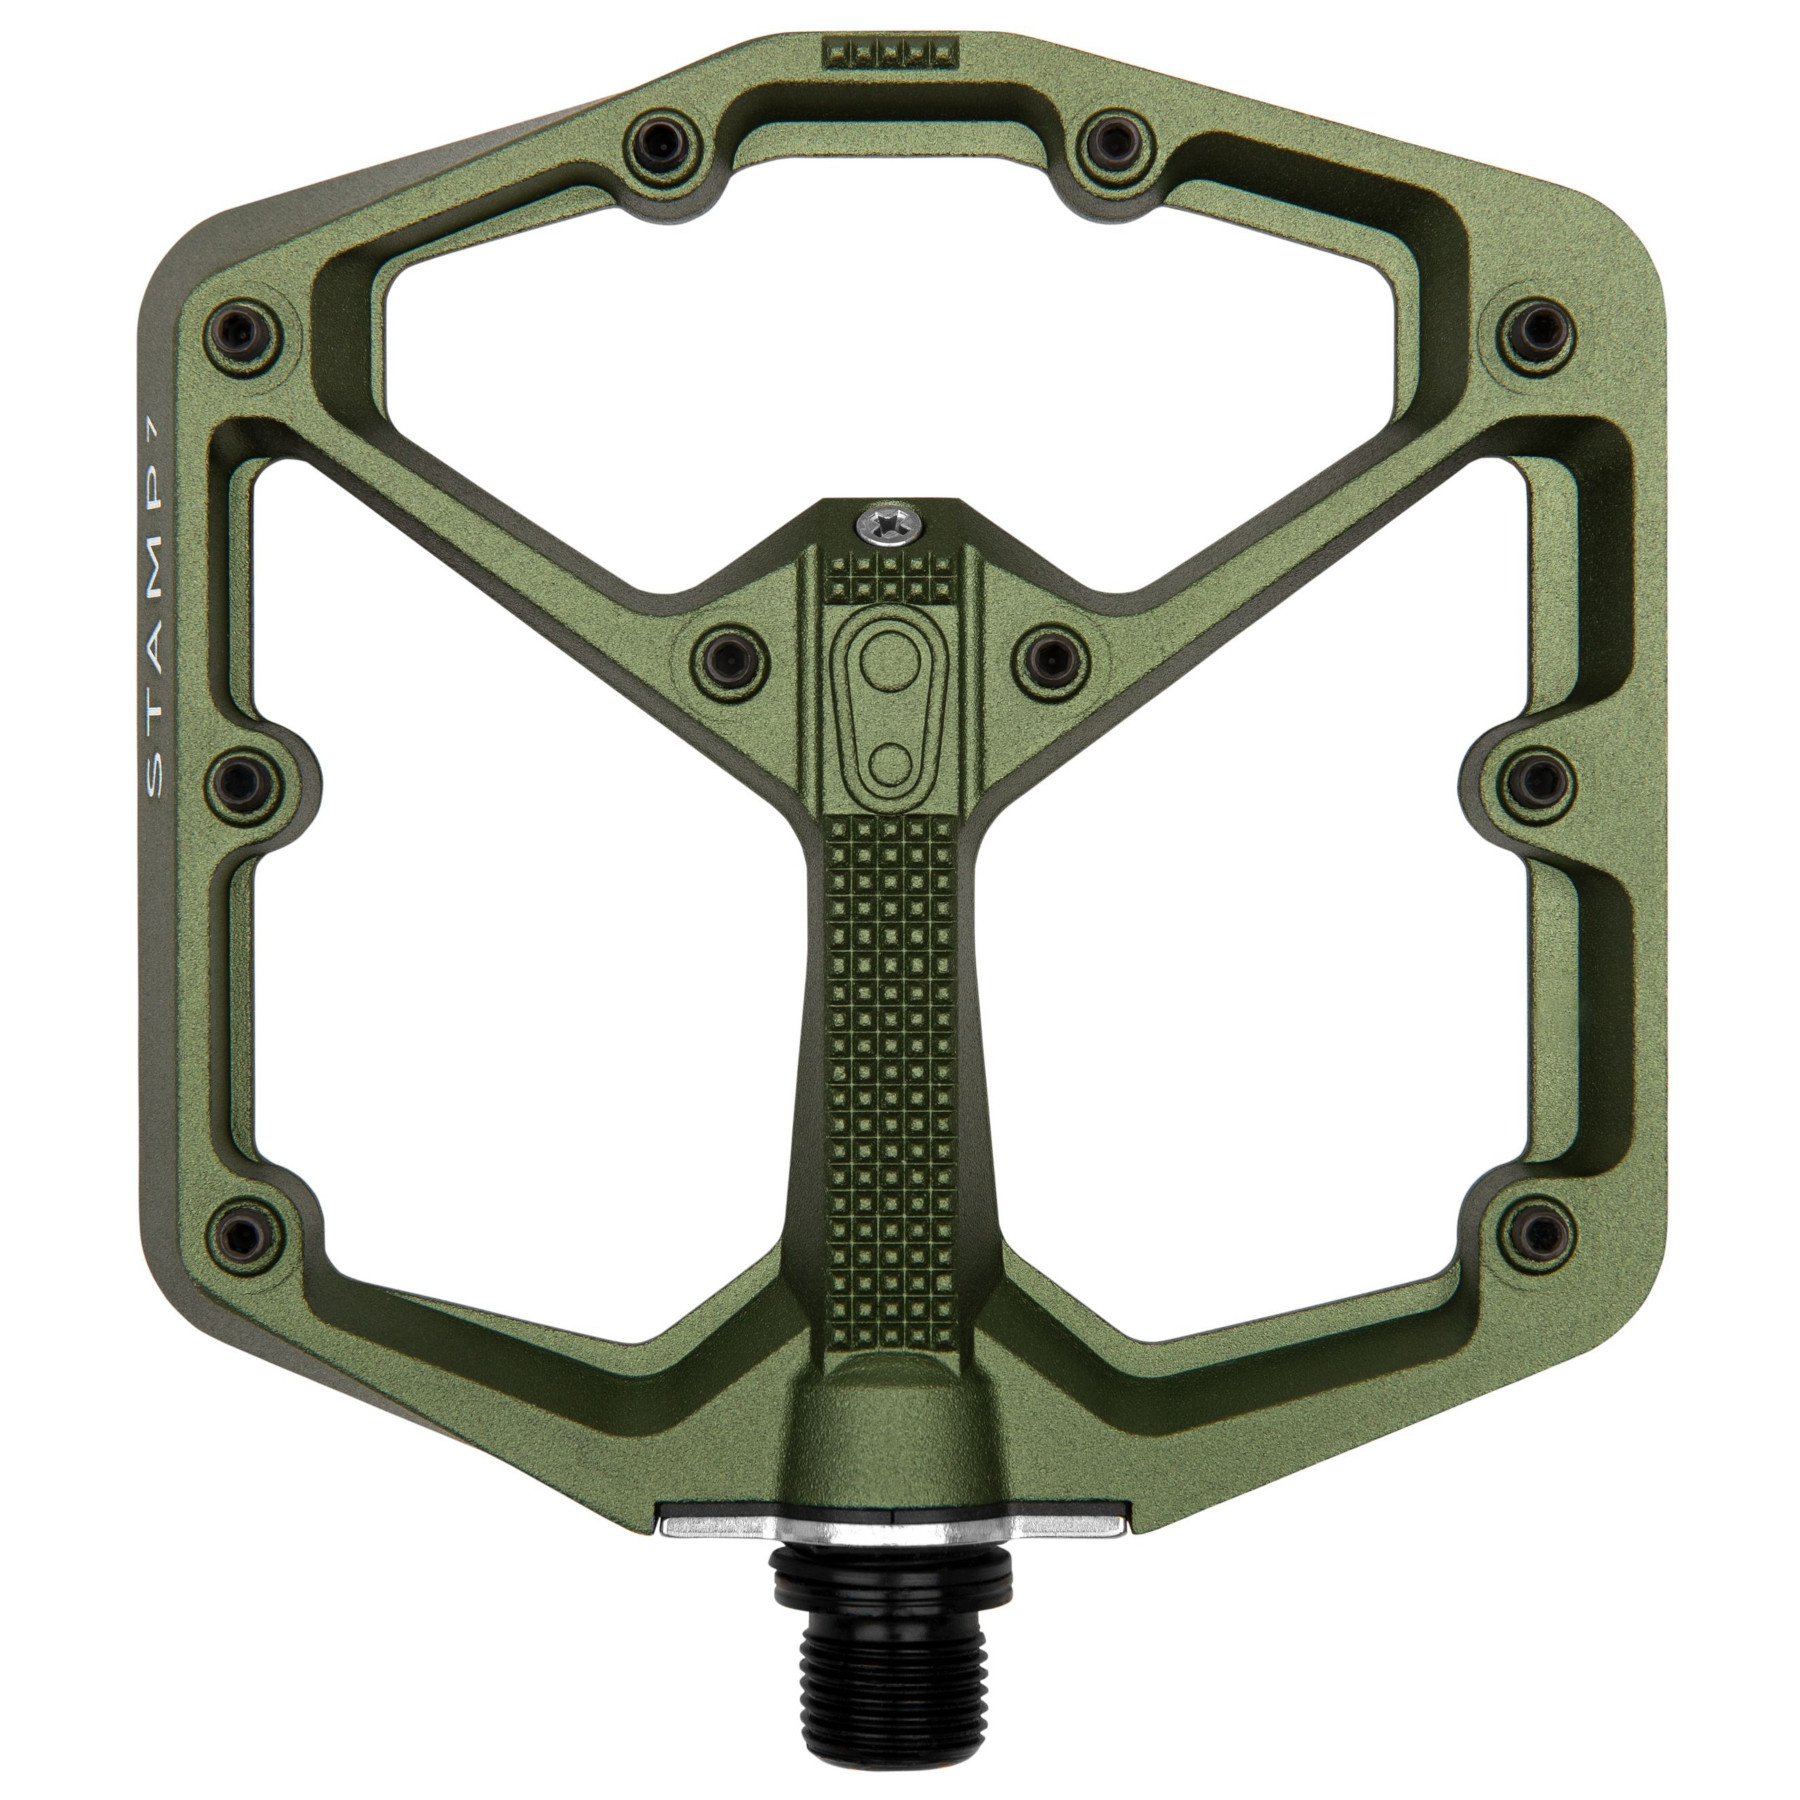 Productfoto van Crankbrothers Stamp 7 Large Platformpedalen - Camo Limited Collection - camo green